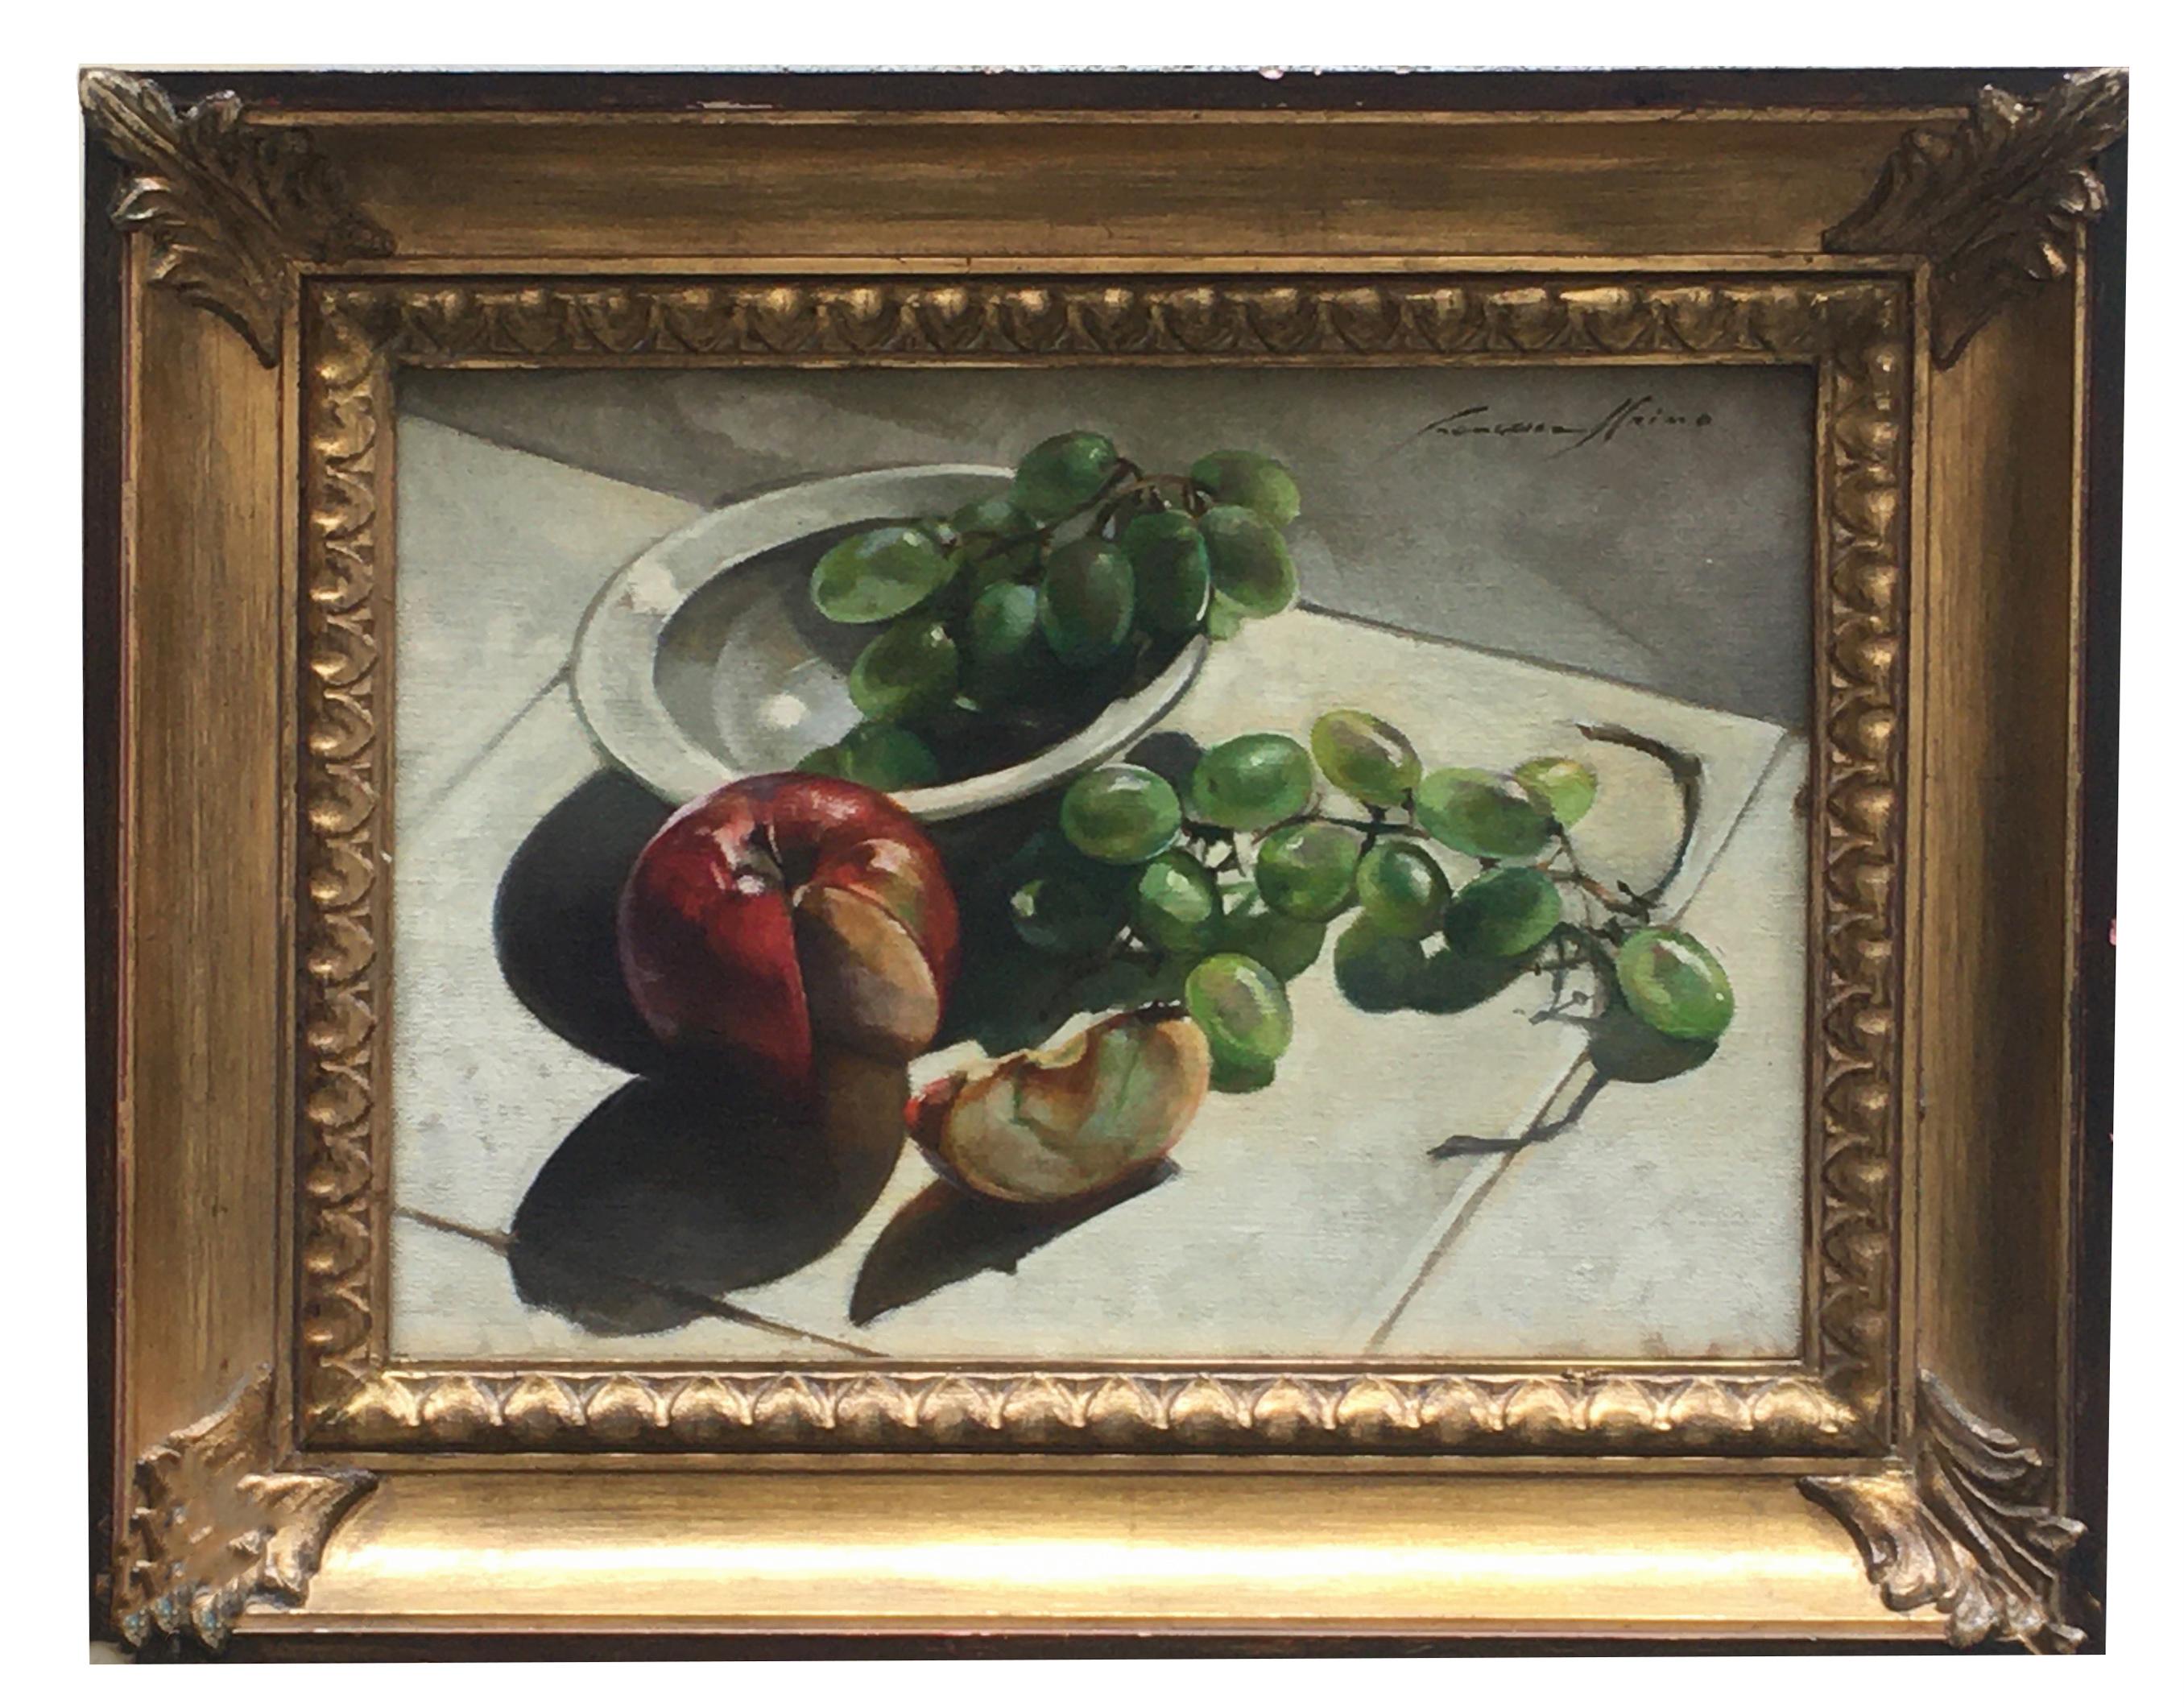 Still life - Oil on canvas painting cm.25x35, Francesca Strino, Italy., 2005
Gold leaf gilded and white lacquered wooden frame cm.37x31

Beautilful and realistic still life, authenticated and dated on the back by the artist..